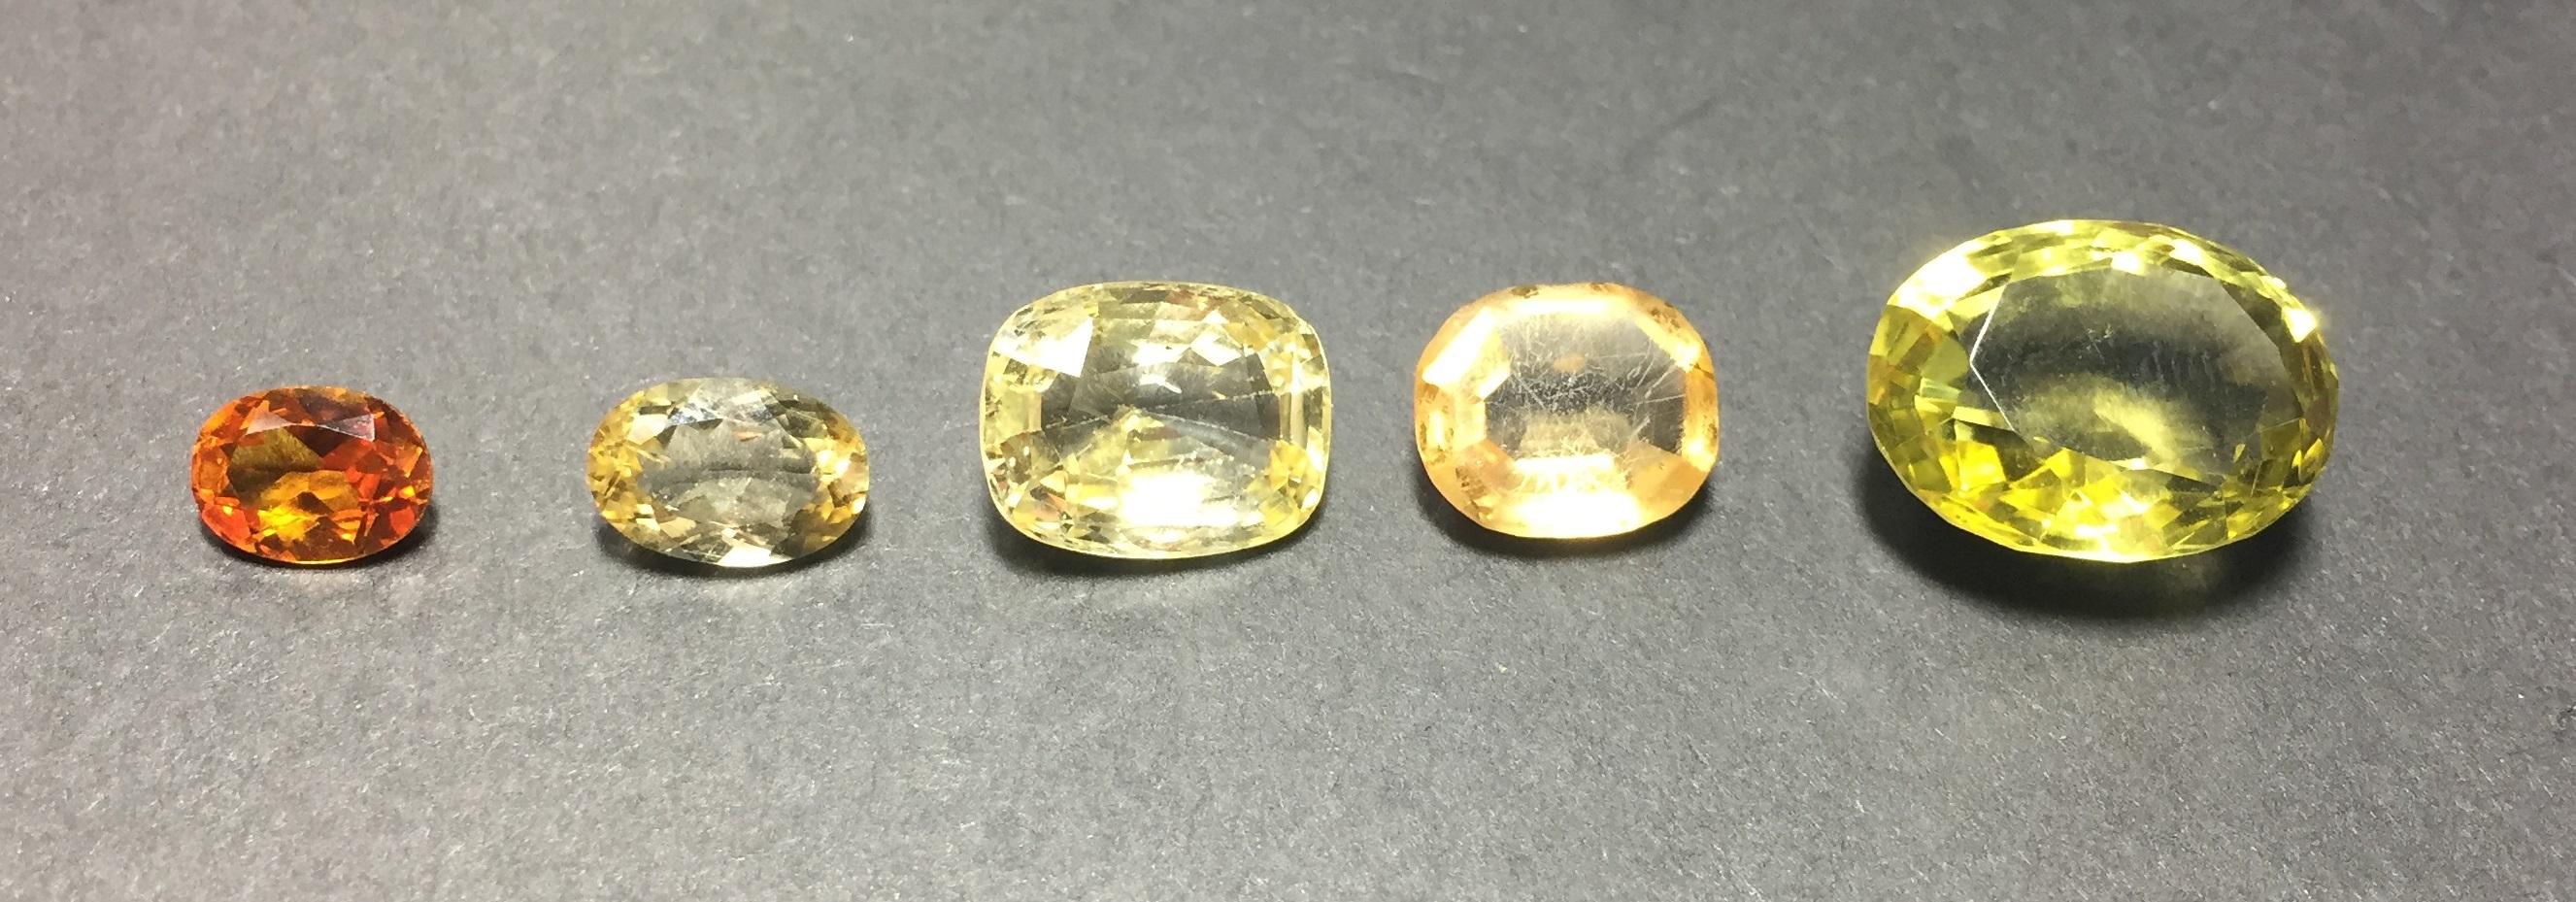 Focus on Gemstone Fluorescence: Looking for the Light - - A yellow stones